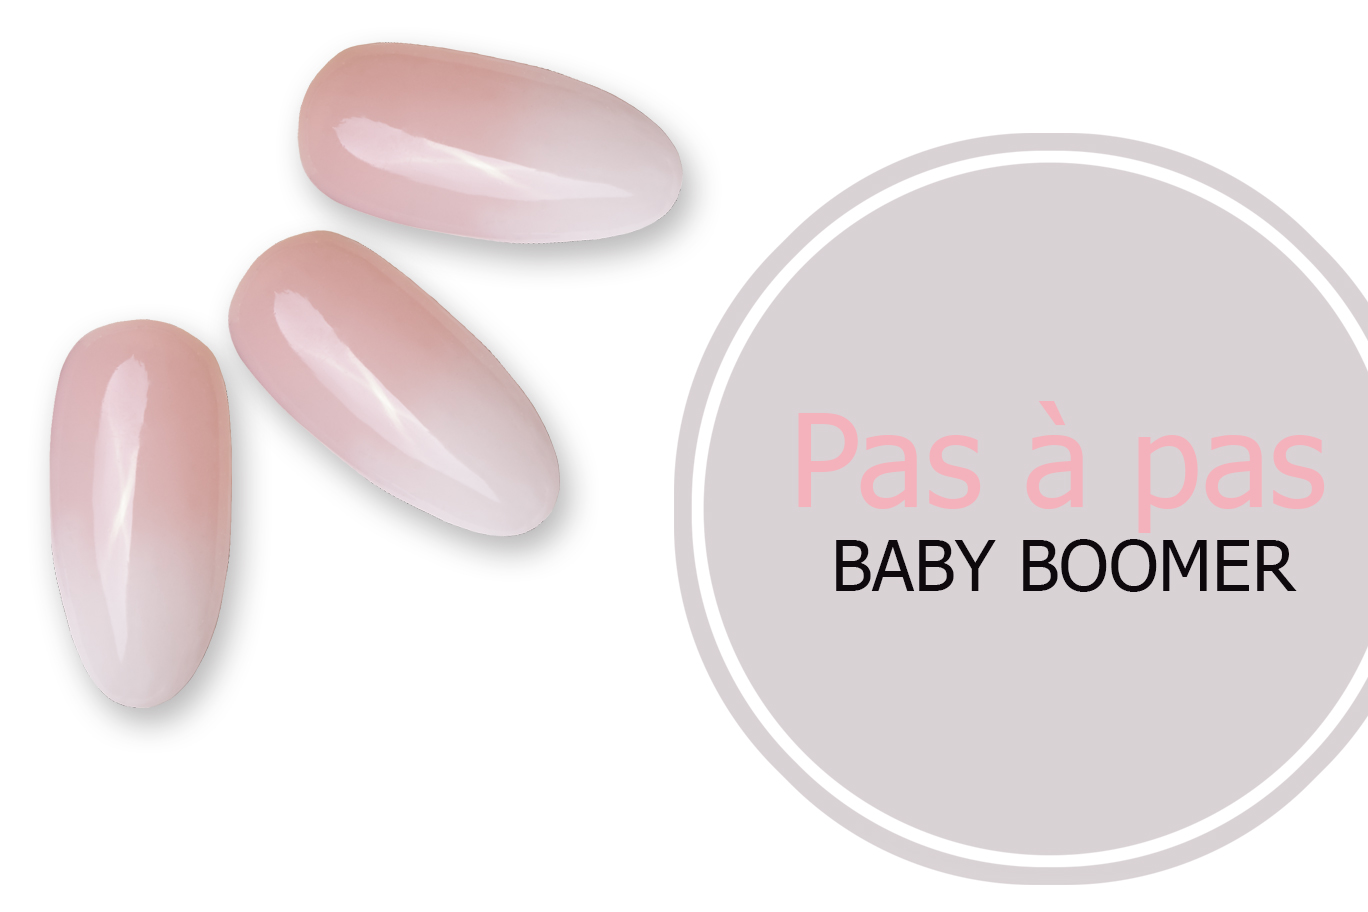 babby boomer gel facile pas a pas ongles nail art manucure